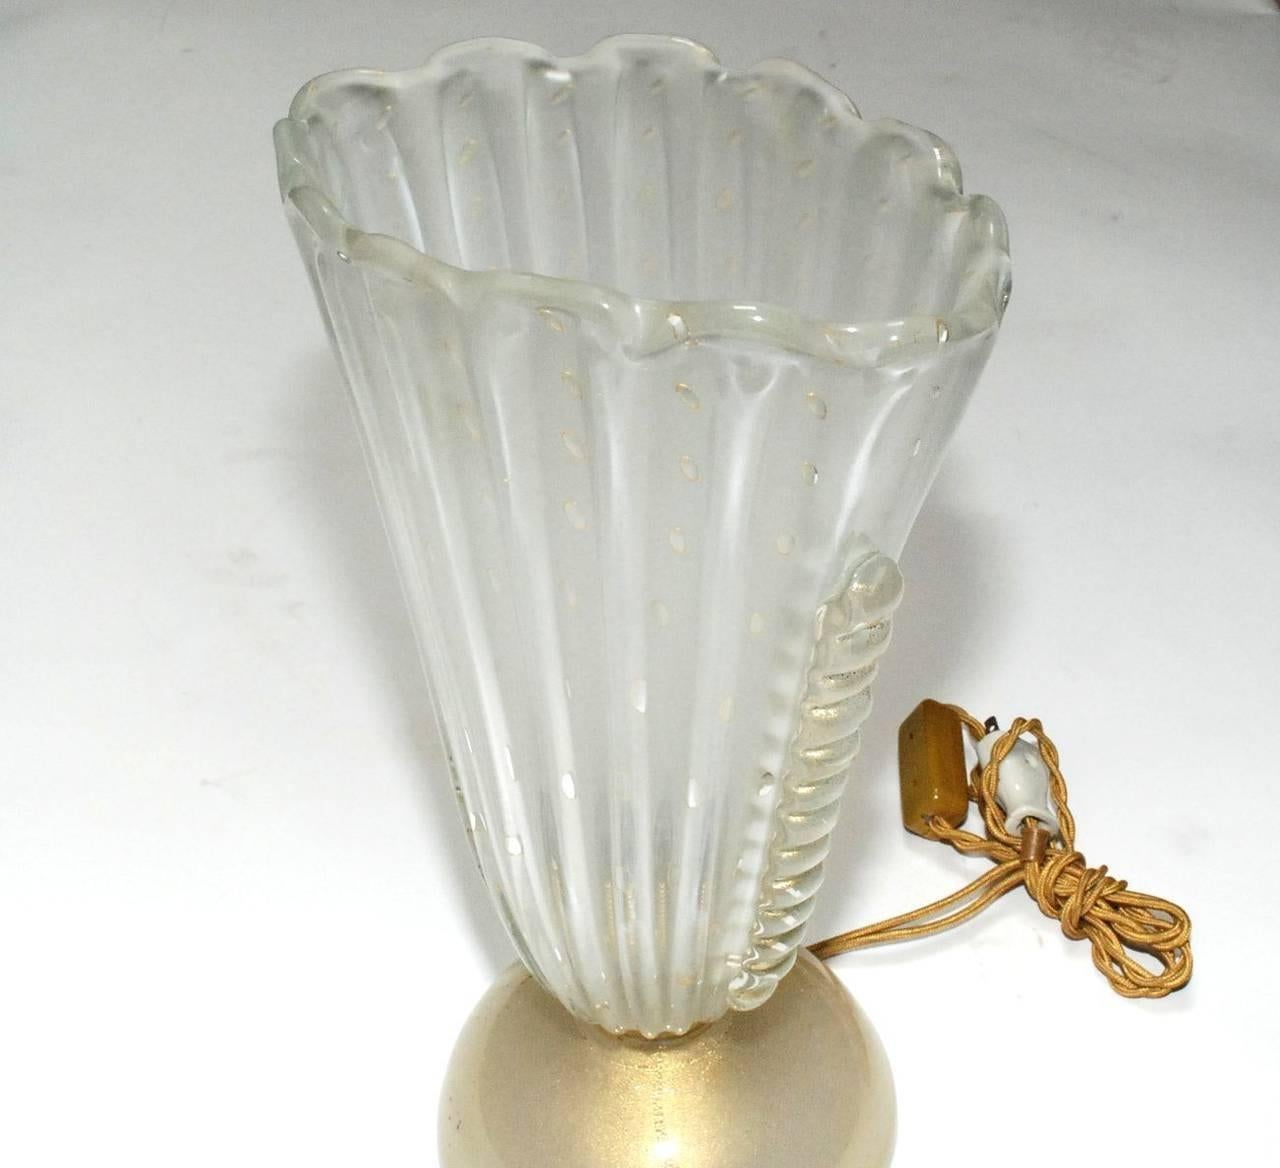 Vintage Italian Murano glass table lamp with frosted shade in bollicine technique, mounted on a gold infused Murano glass base / Made in Italy circa 1960s 
1 light / E26 or E27 type / max 60W 
Measures: Height 15 inches / Width 9 inches / Depth